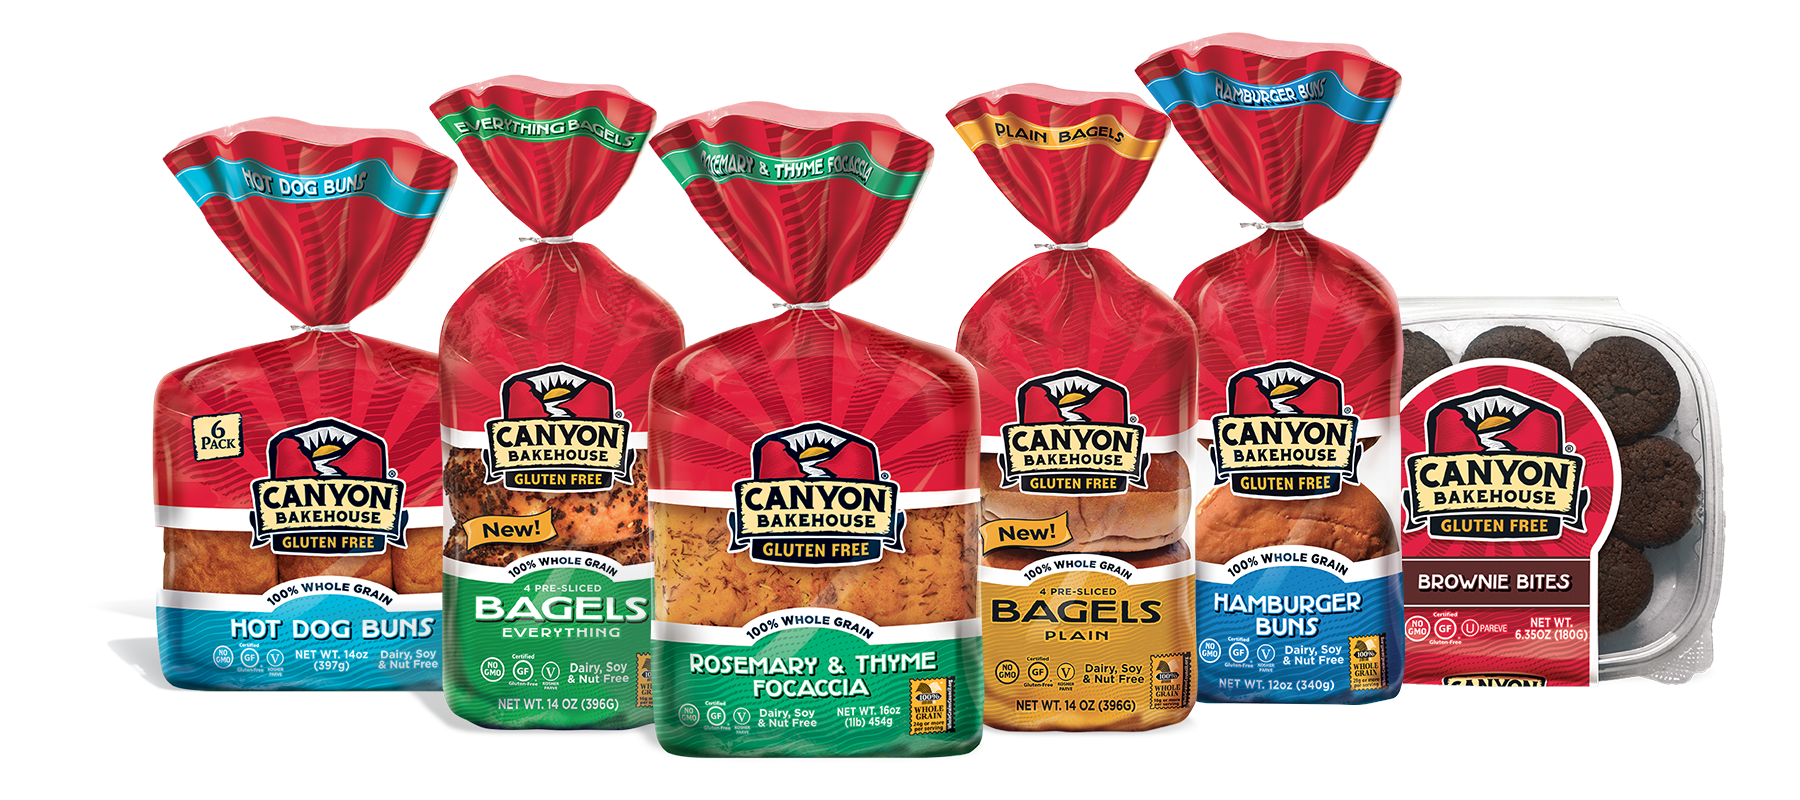 Flowers Foods acquires Canyon Bakehouse for $205 million to boost sales